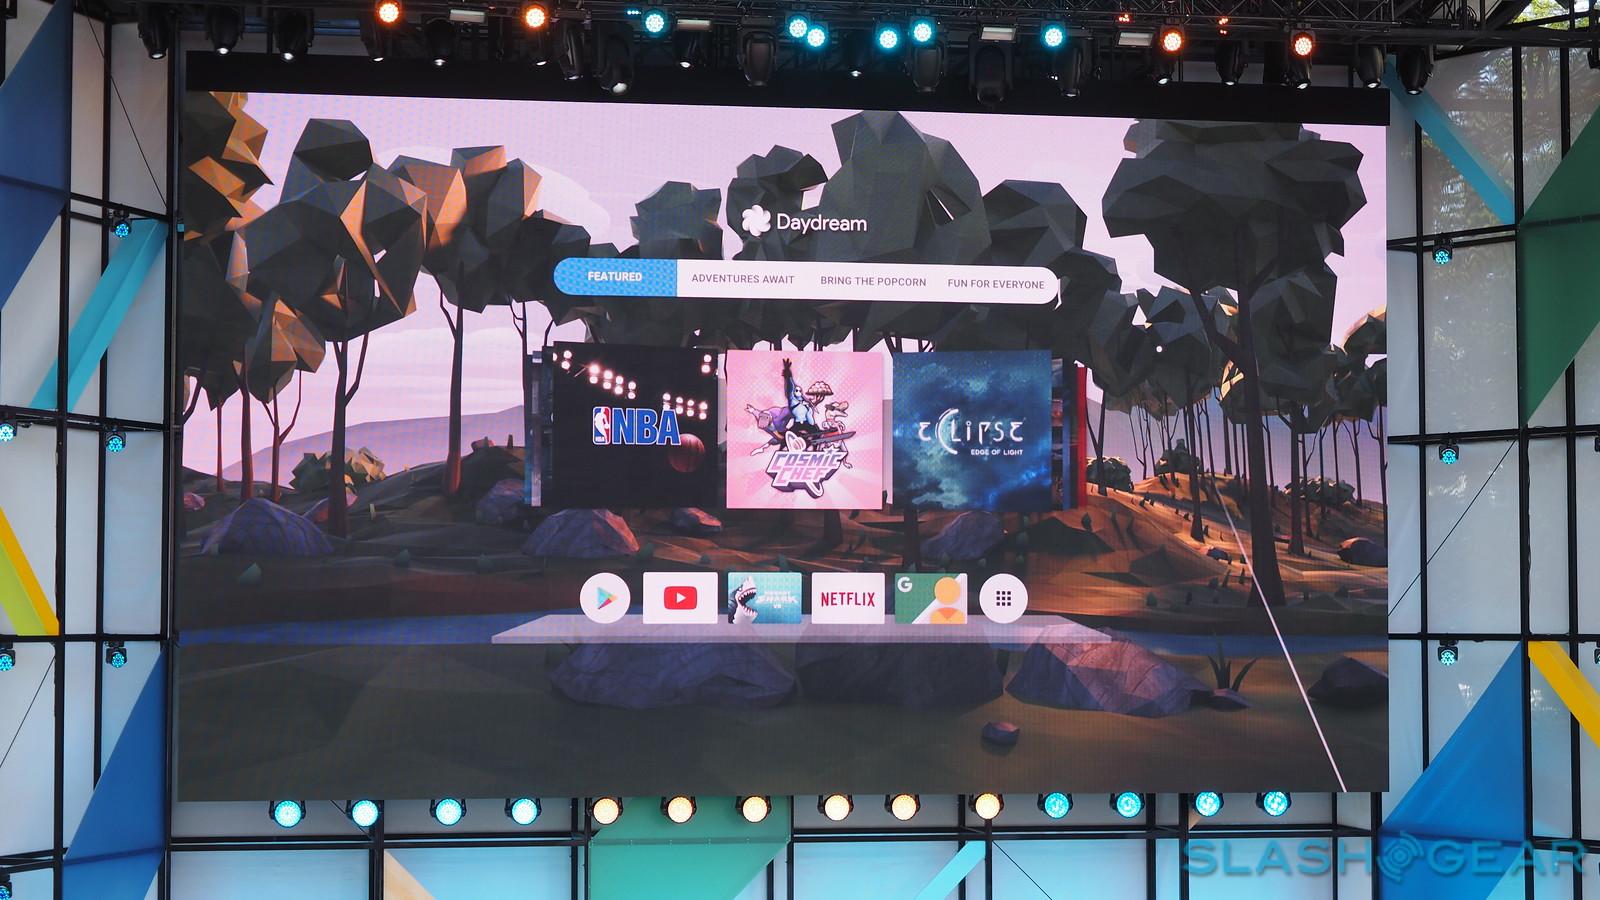 This Is Google Daydream 2.0 